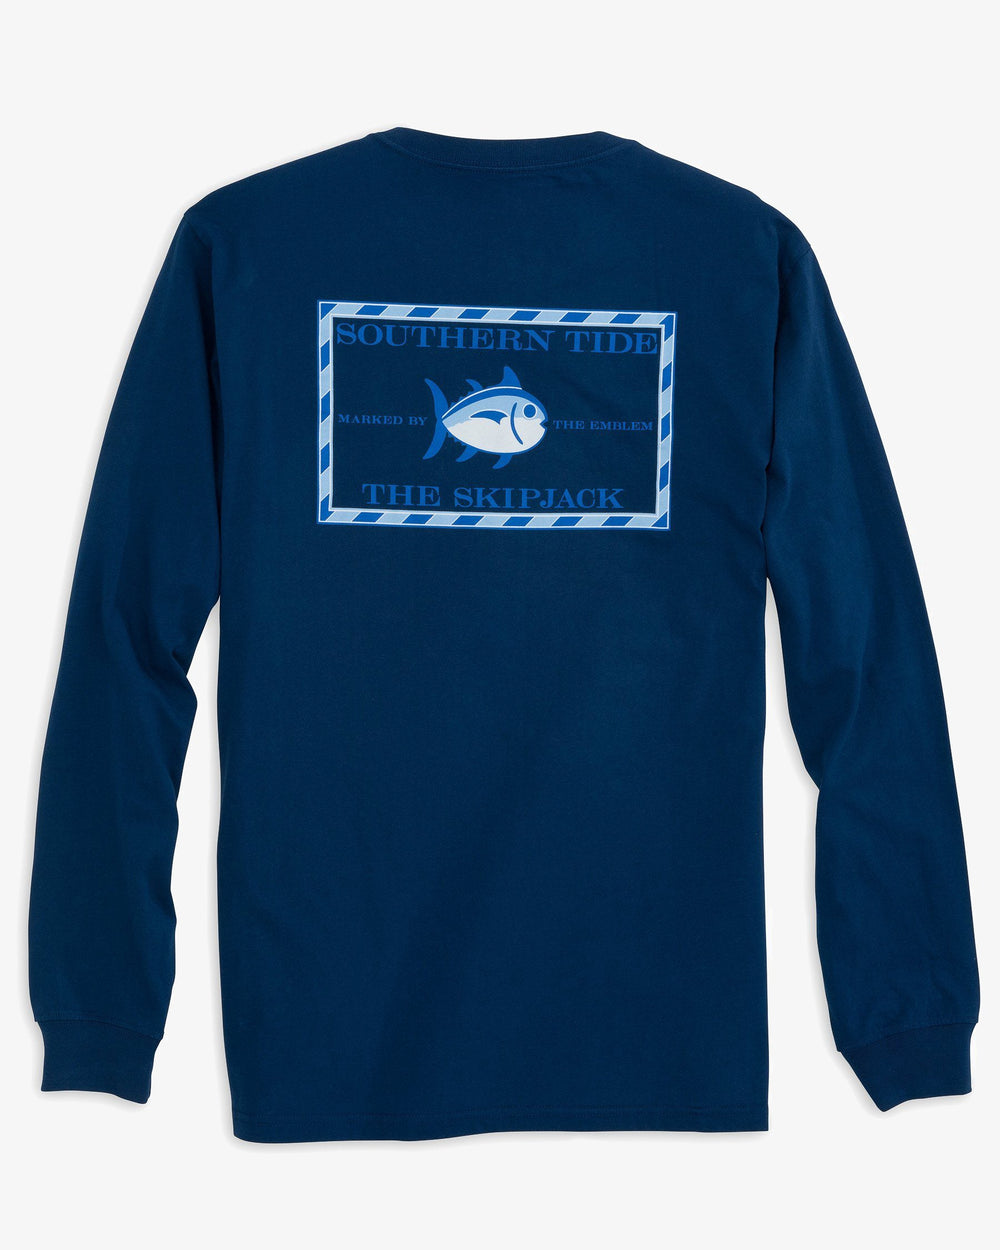 The back view of the Men's Navy Long Sleeve Original Skipjack T-shirt by Southern Tide - Yacht Blue